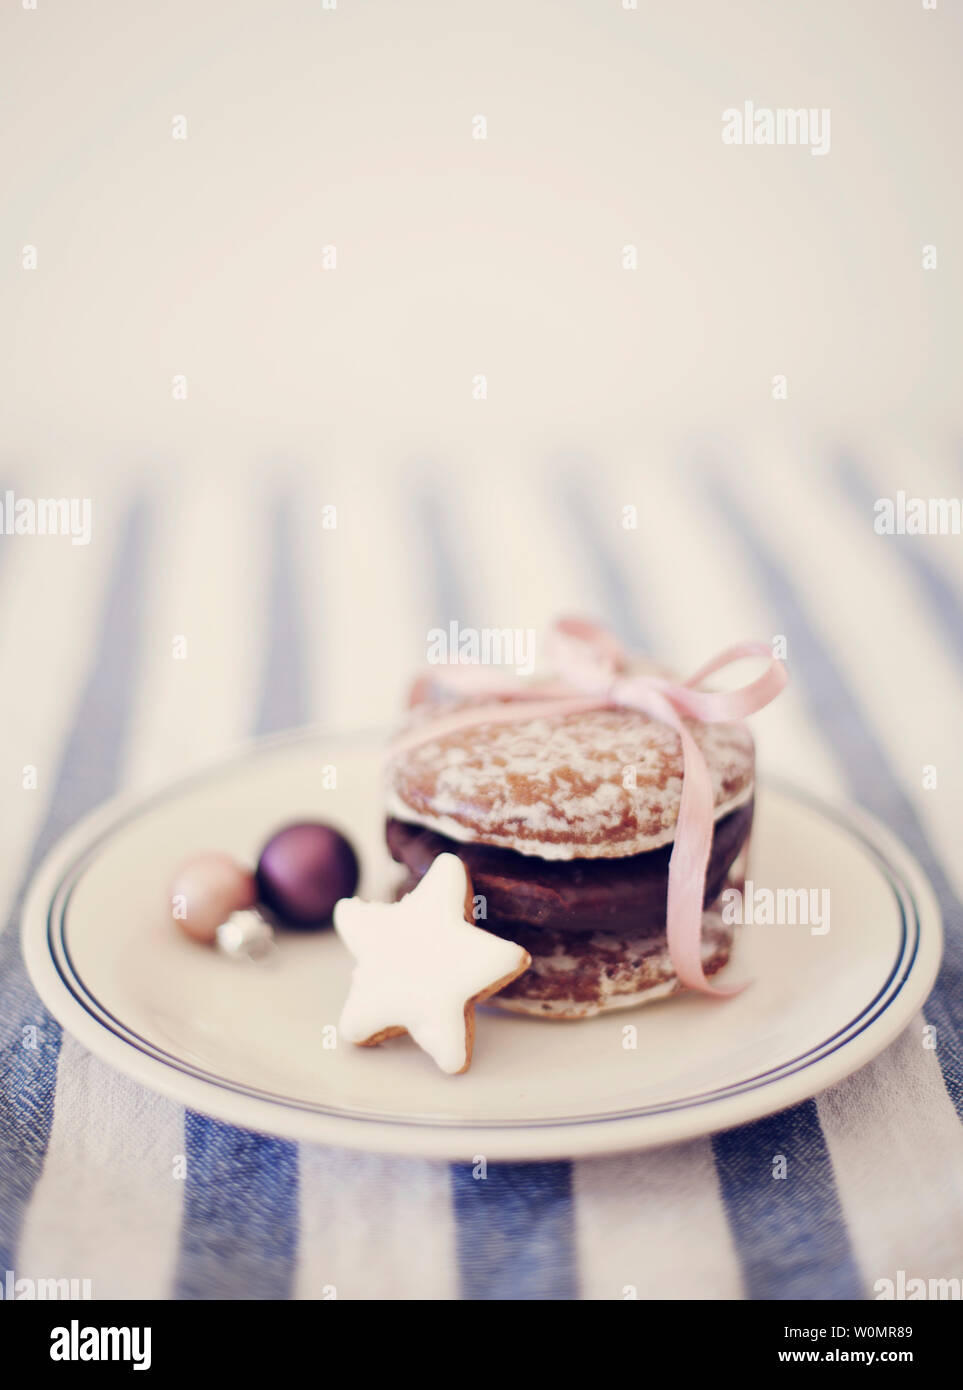 gingerbread with christmas decoration on a plate Stock Photo